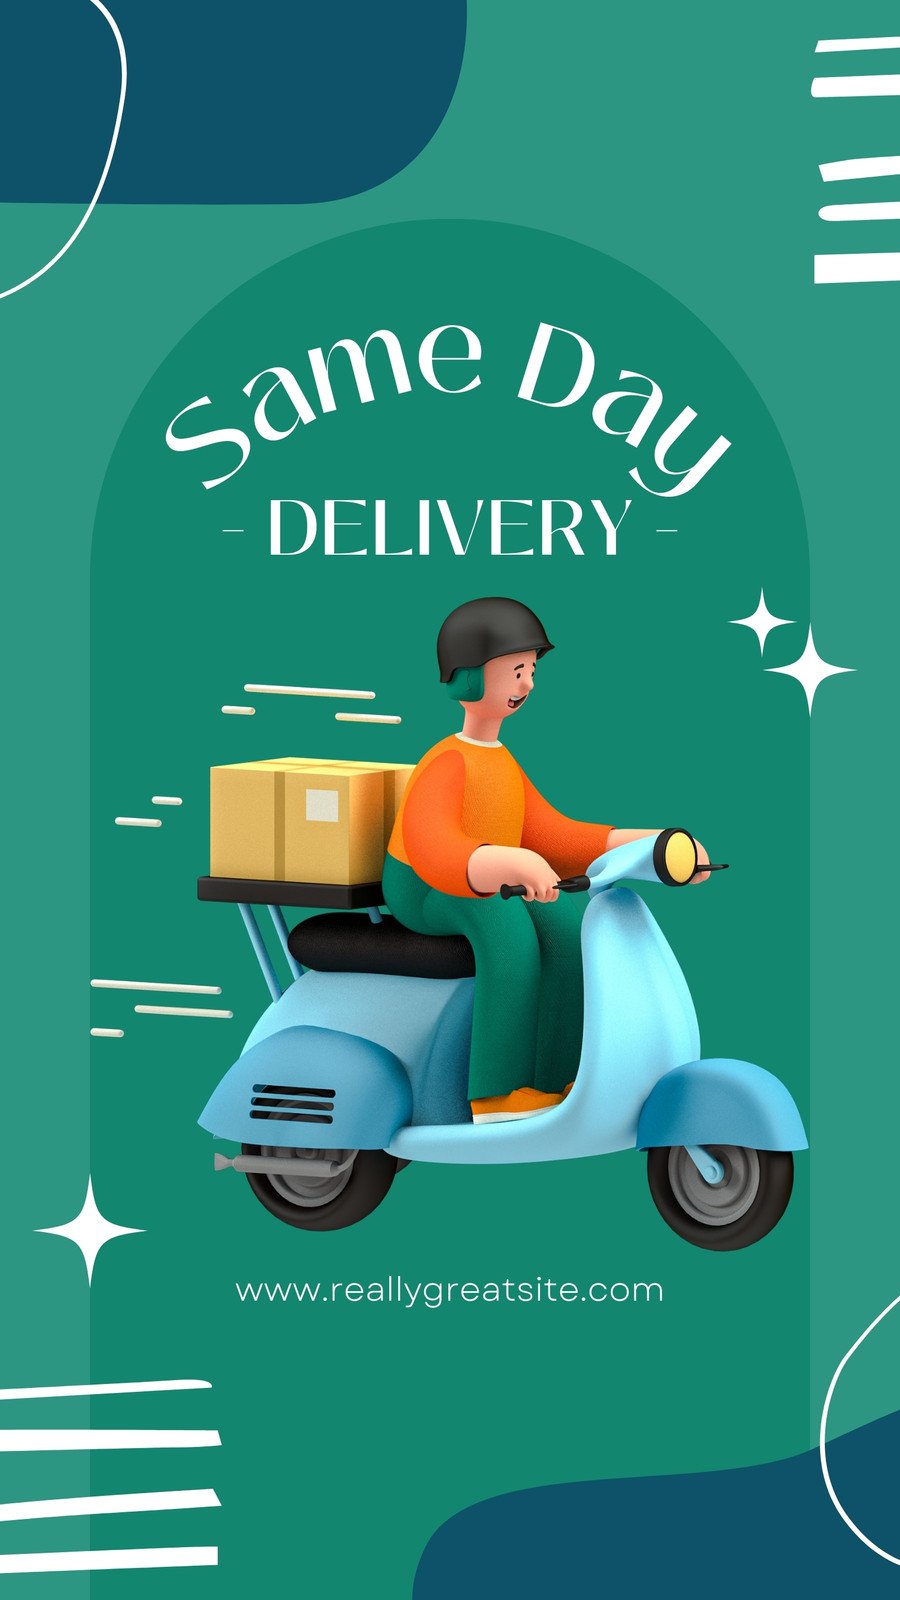 Free and customizable delivery templates